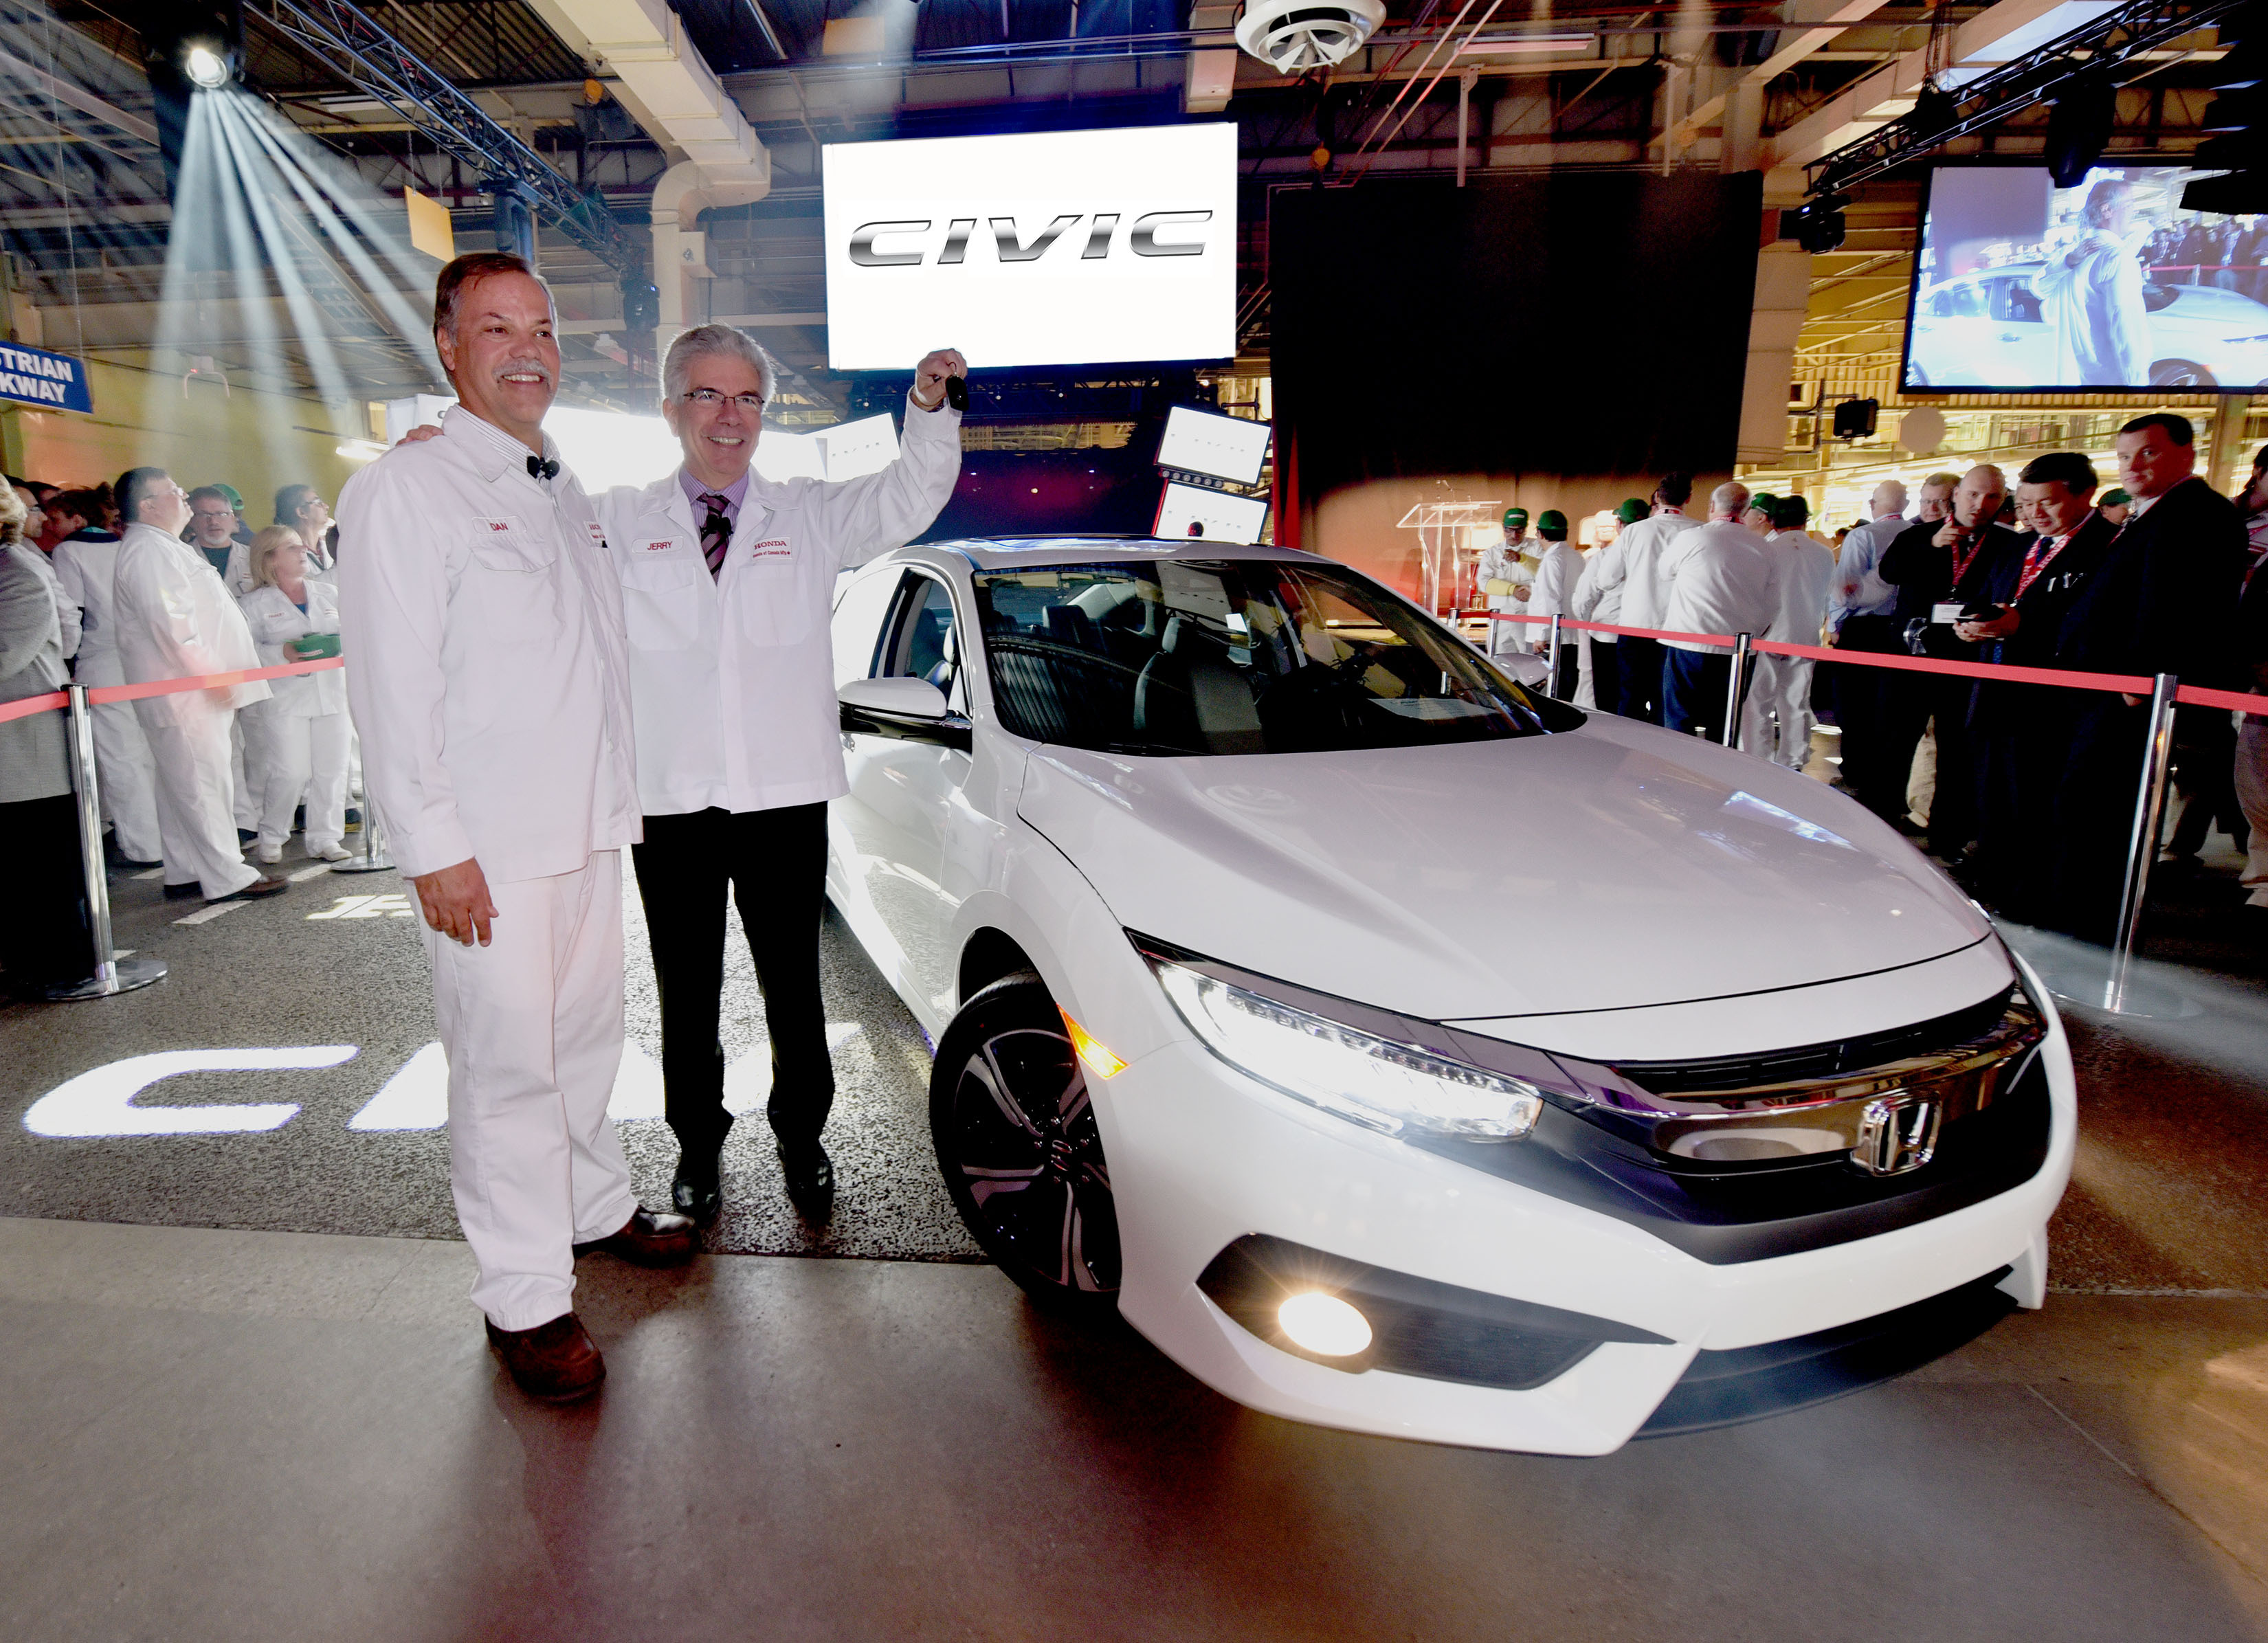 Honda of Canada Mfg., Global Lead Plant for Tenth-Generation Civic, Begins  Mass Production of All-New 2016 Honda Civic Sedan | Business Wire